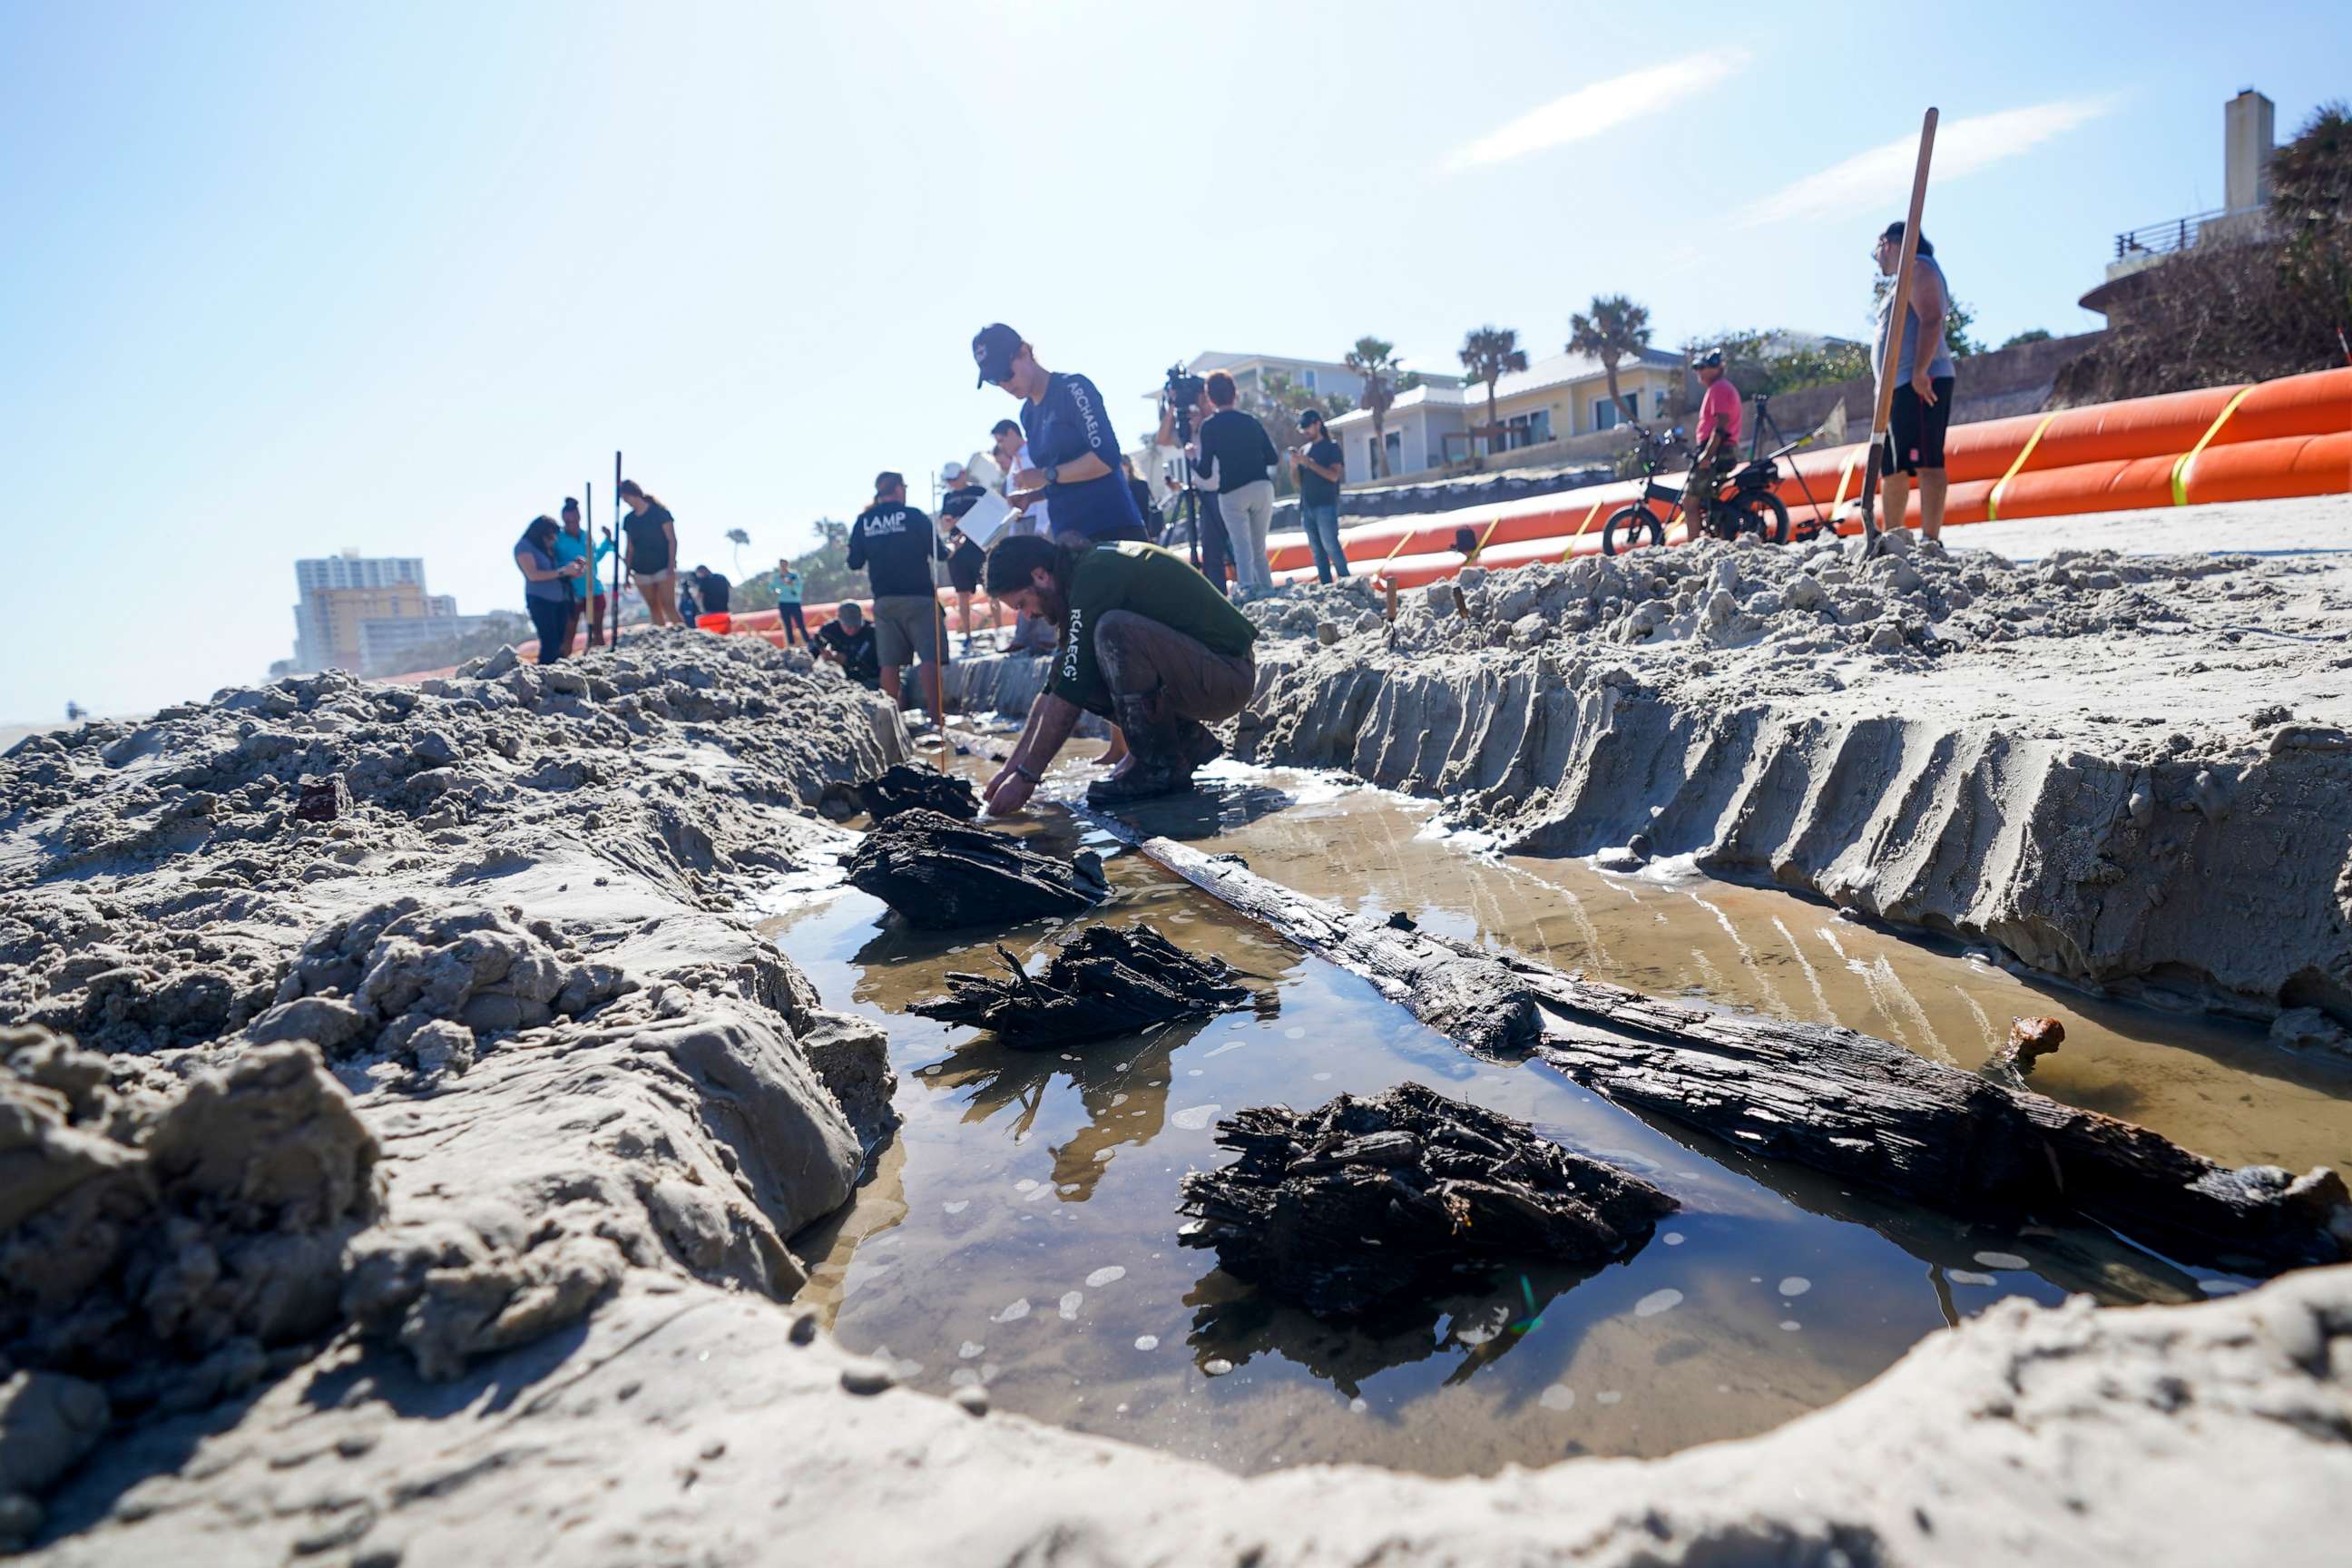 PHOTO: Members of a team of archaeologists study a wooden shipwreck in the sand, Dec. 6, 2022, in Daytona Beach, Fla.